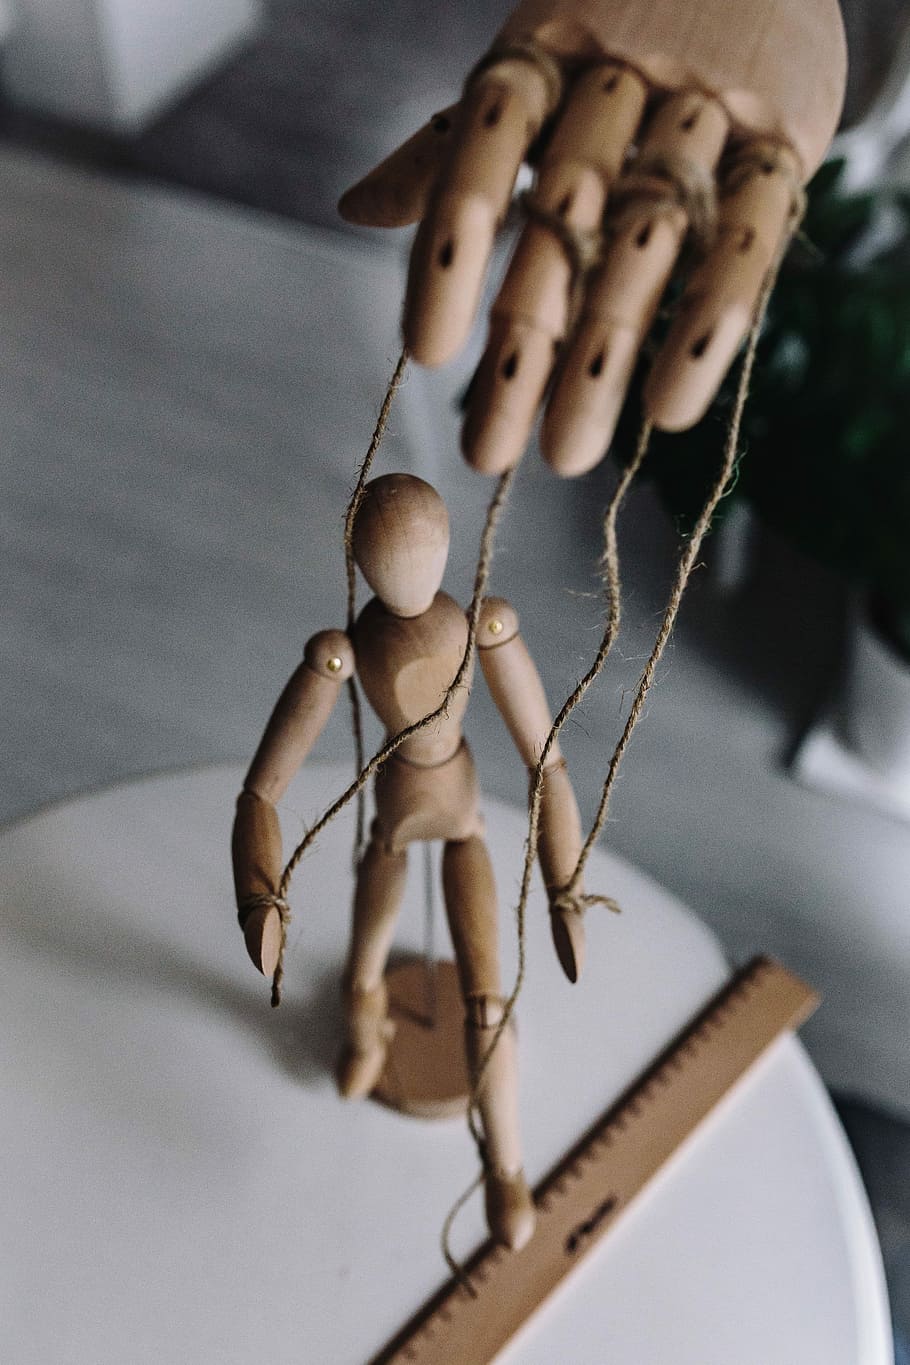 mannequin, various, poses, Wooden, hand, wood, model, yarn, pencils, puppet